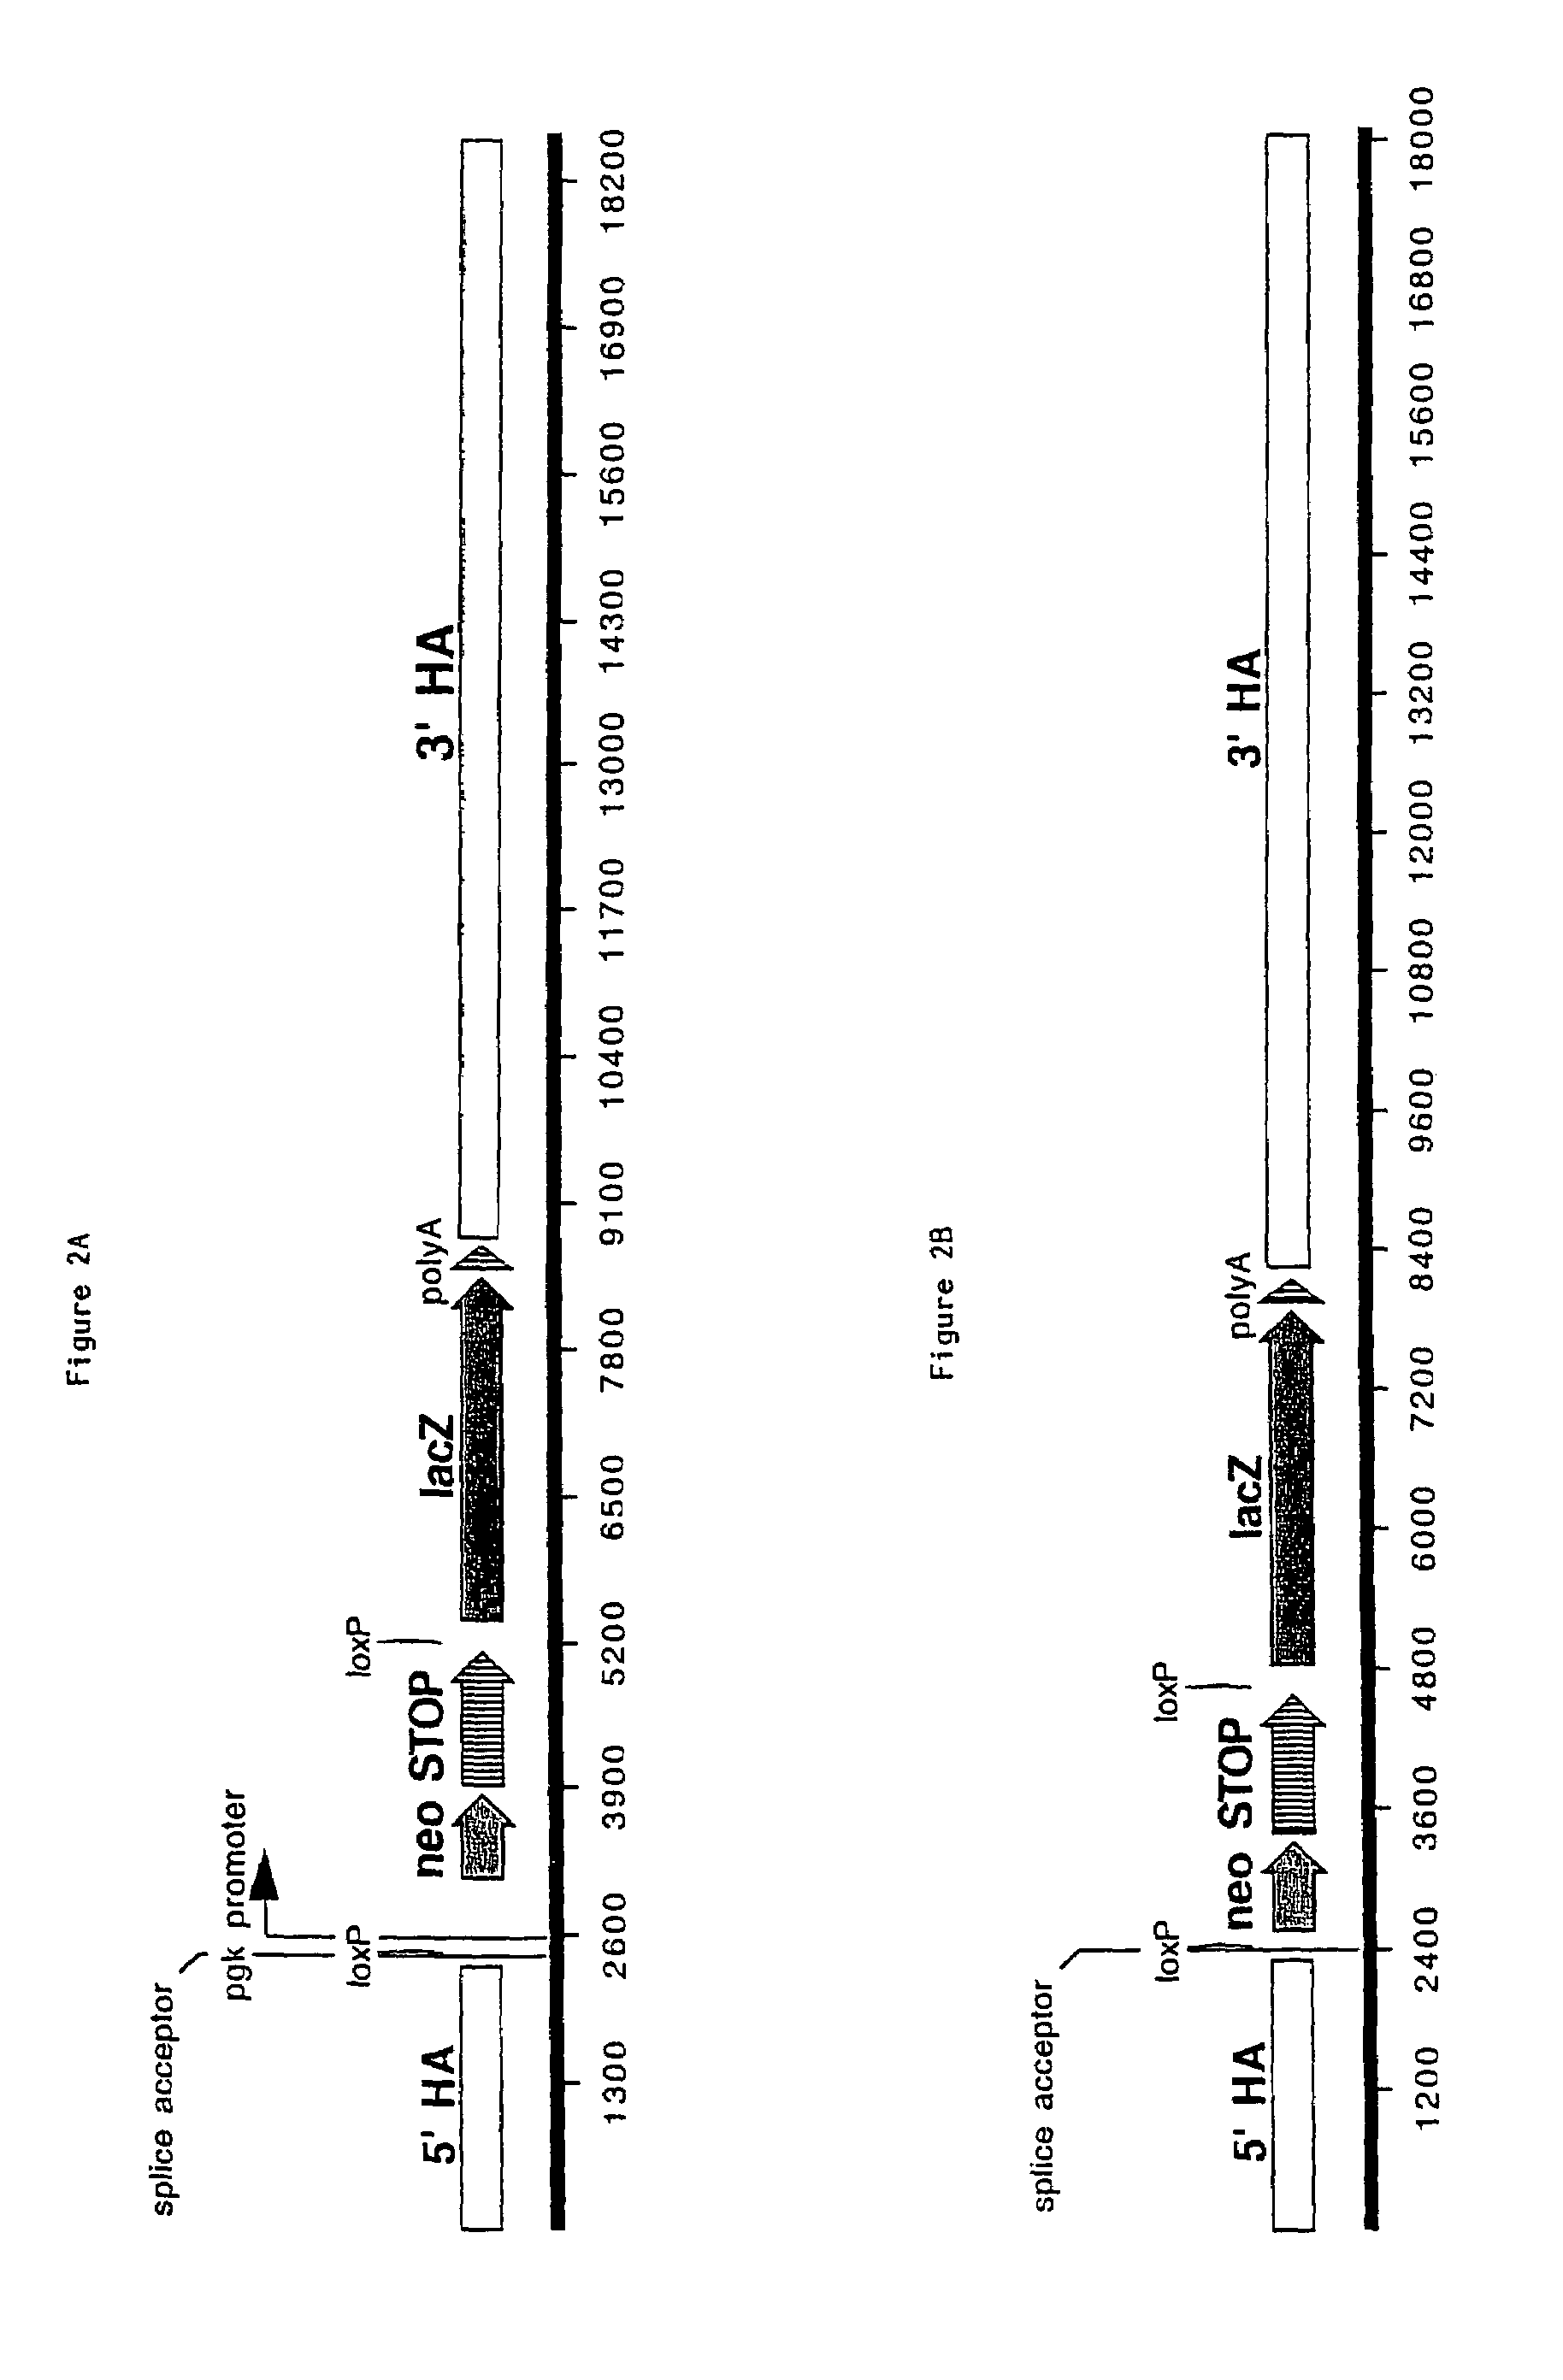 Method for targeting transcriptionally active loci